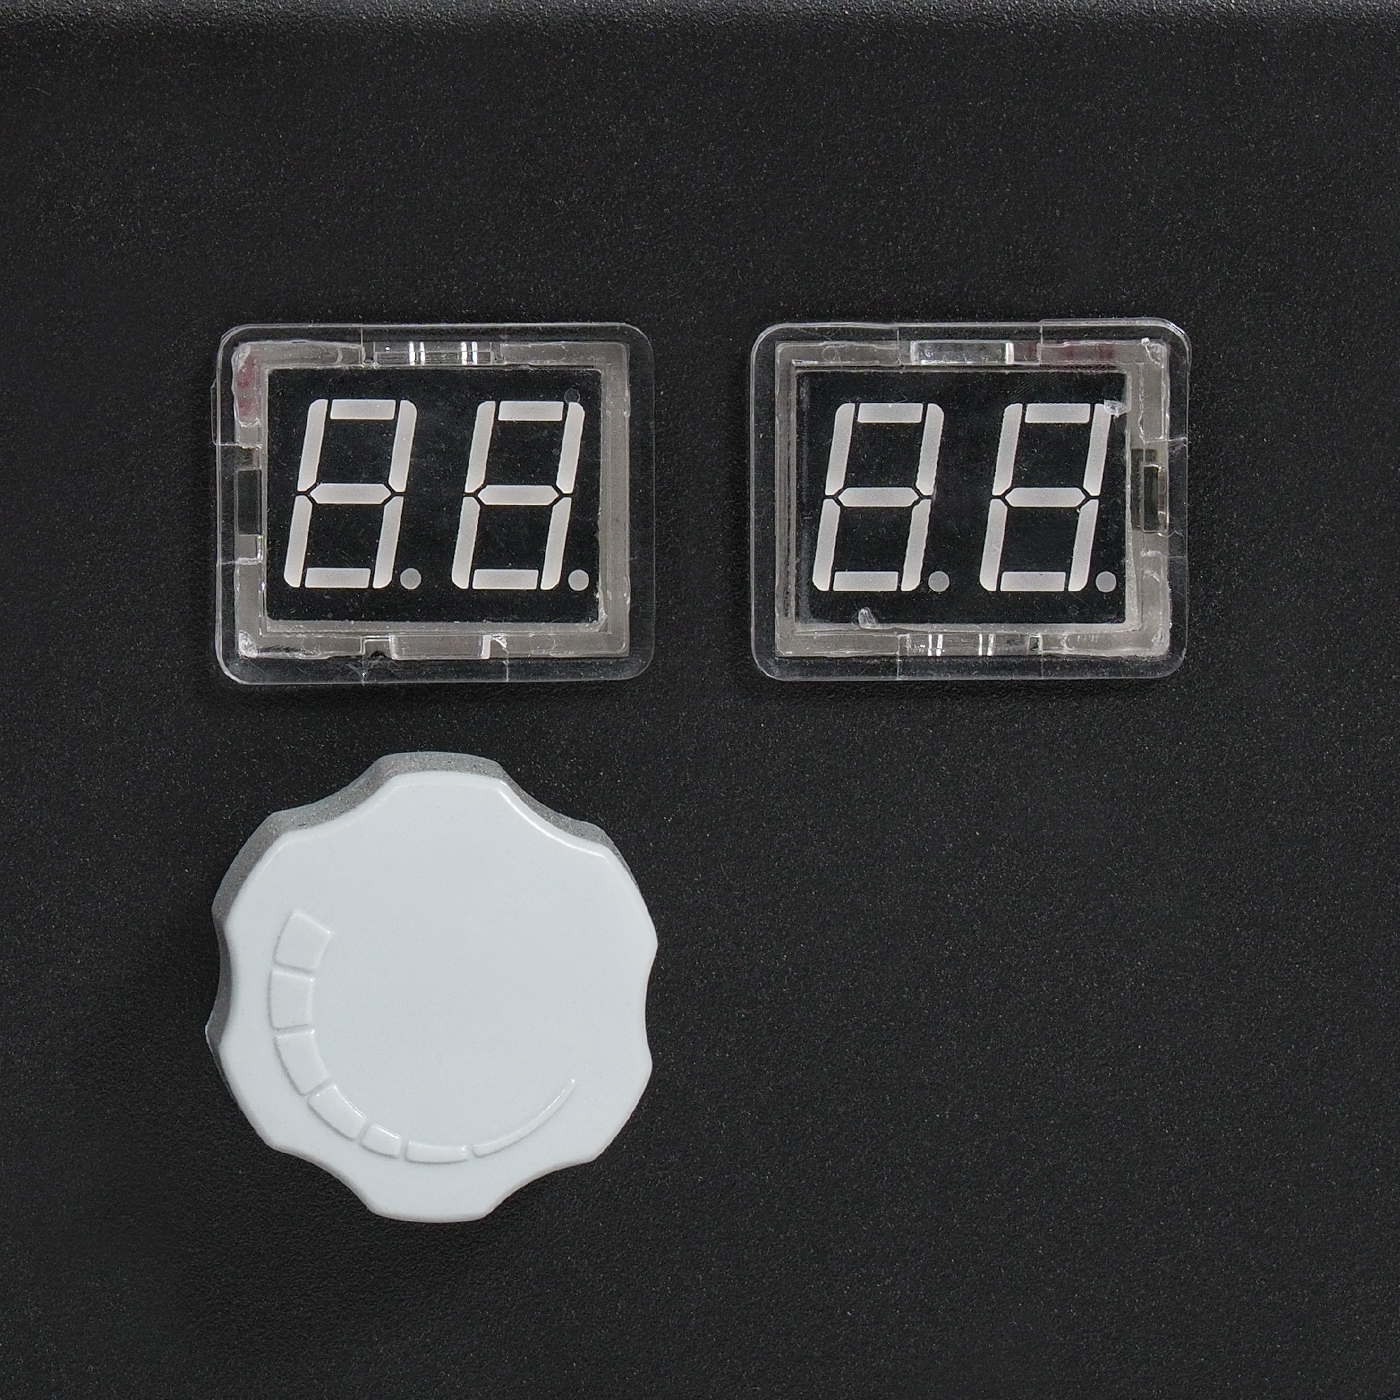 Electronic thermostat